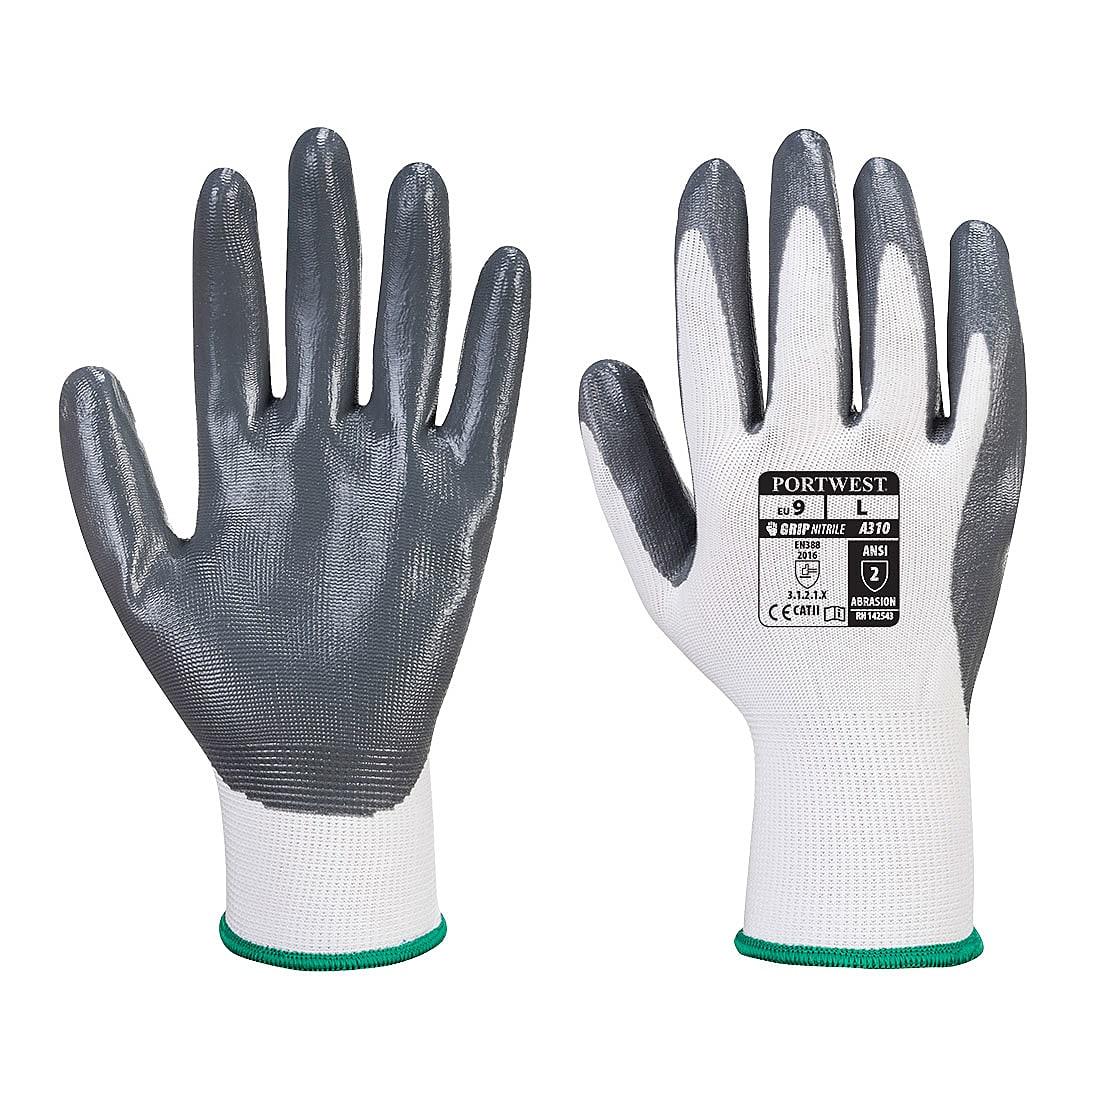 Portwest Flexo Grip Nitrile Gloves in Grey / White (Product Code: A310)